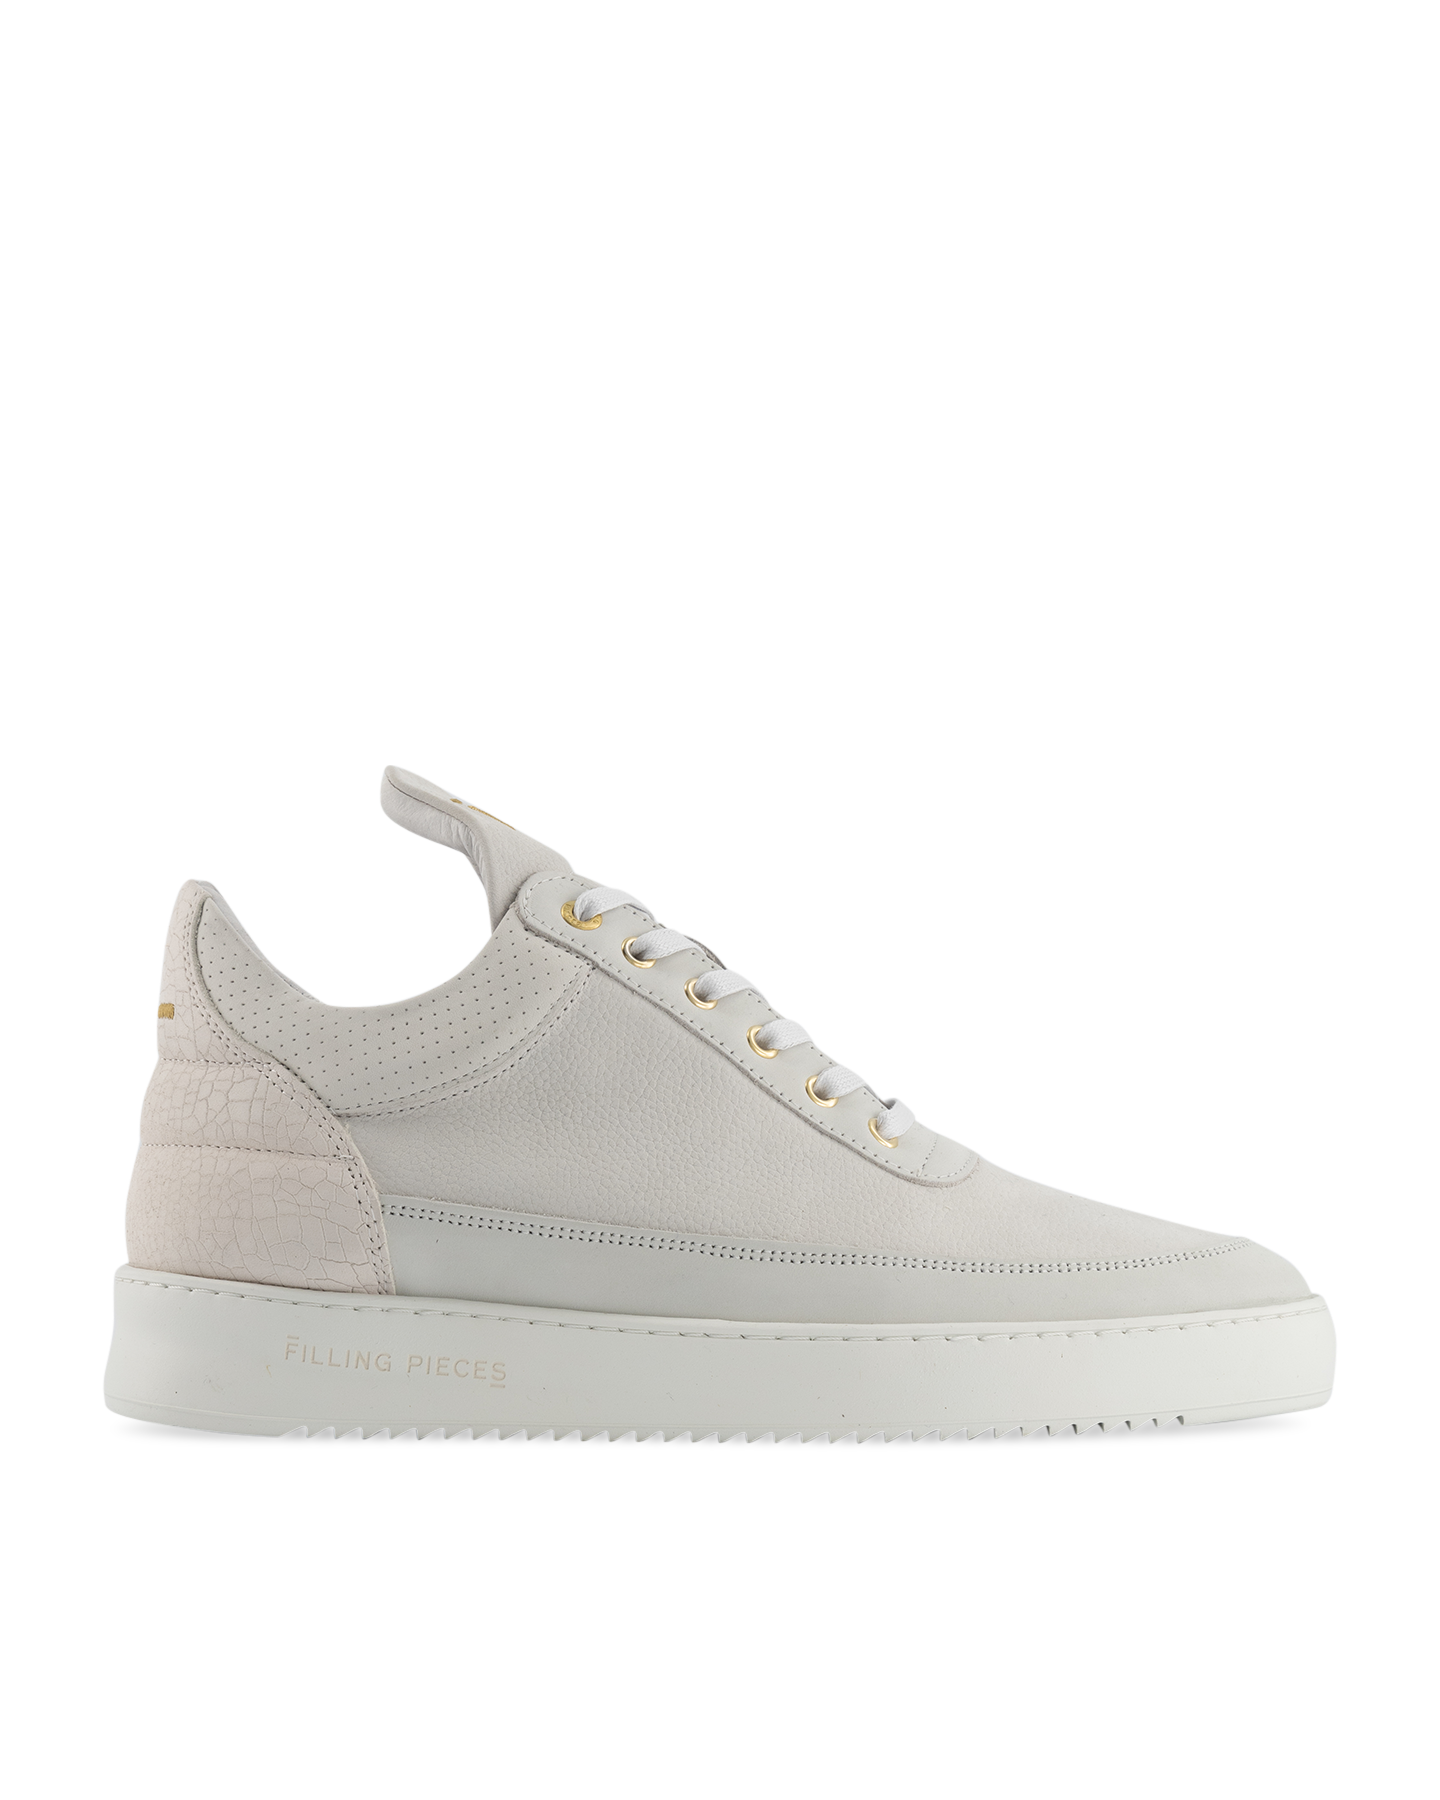 Filling Pieces Low Top Ripple Ceres Off White OFFWHITE 1